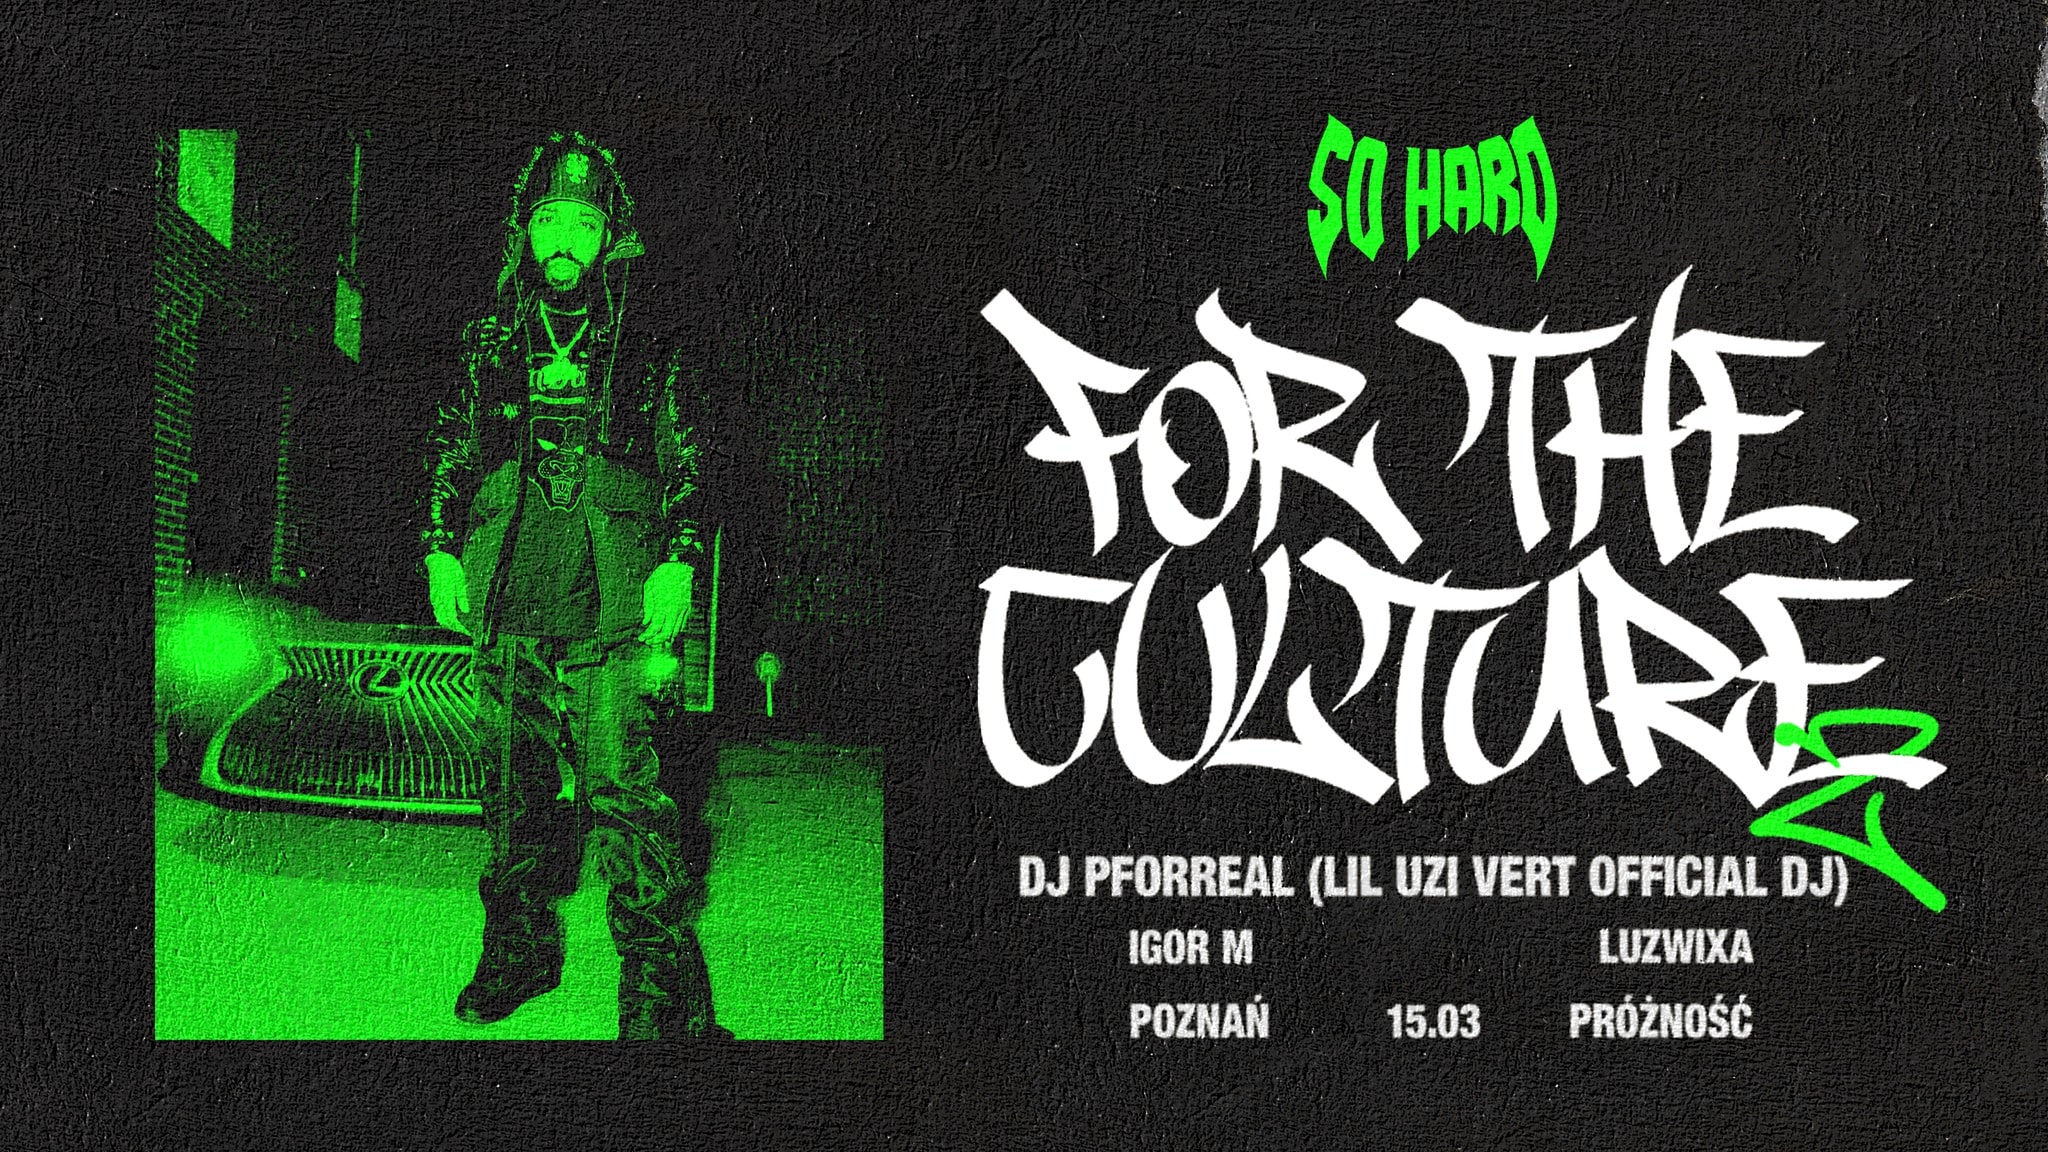 SO HARD FOR THE CULTURE 2 ft. DJ P FOR REAL | Poznań 15.03